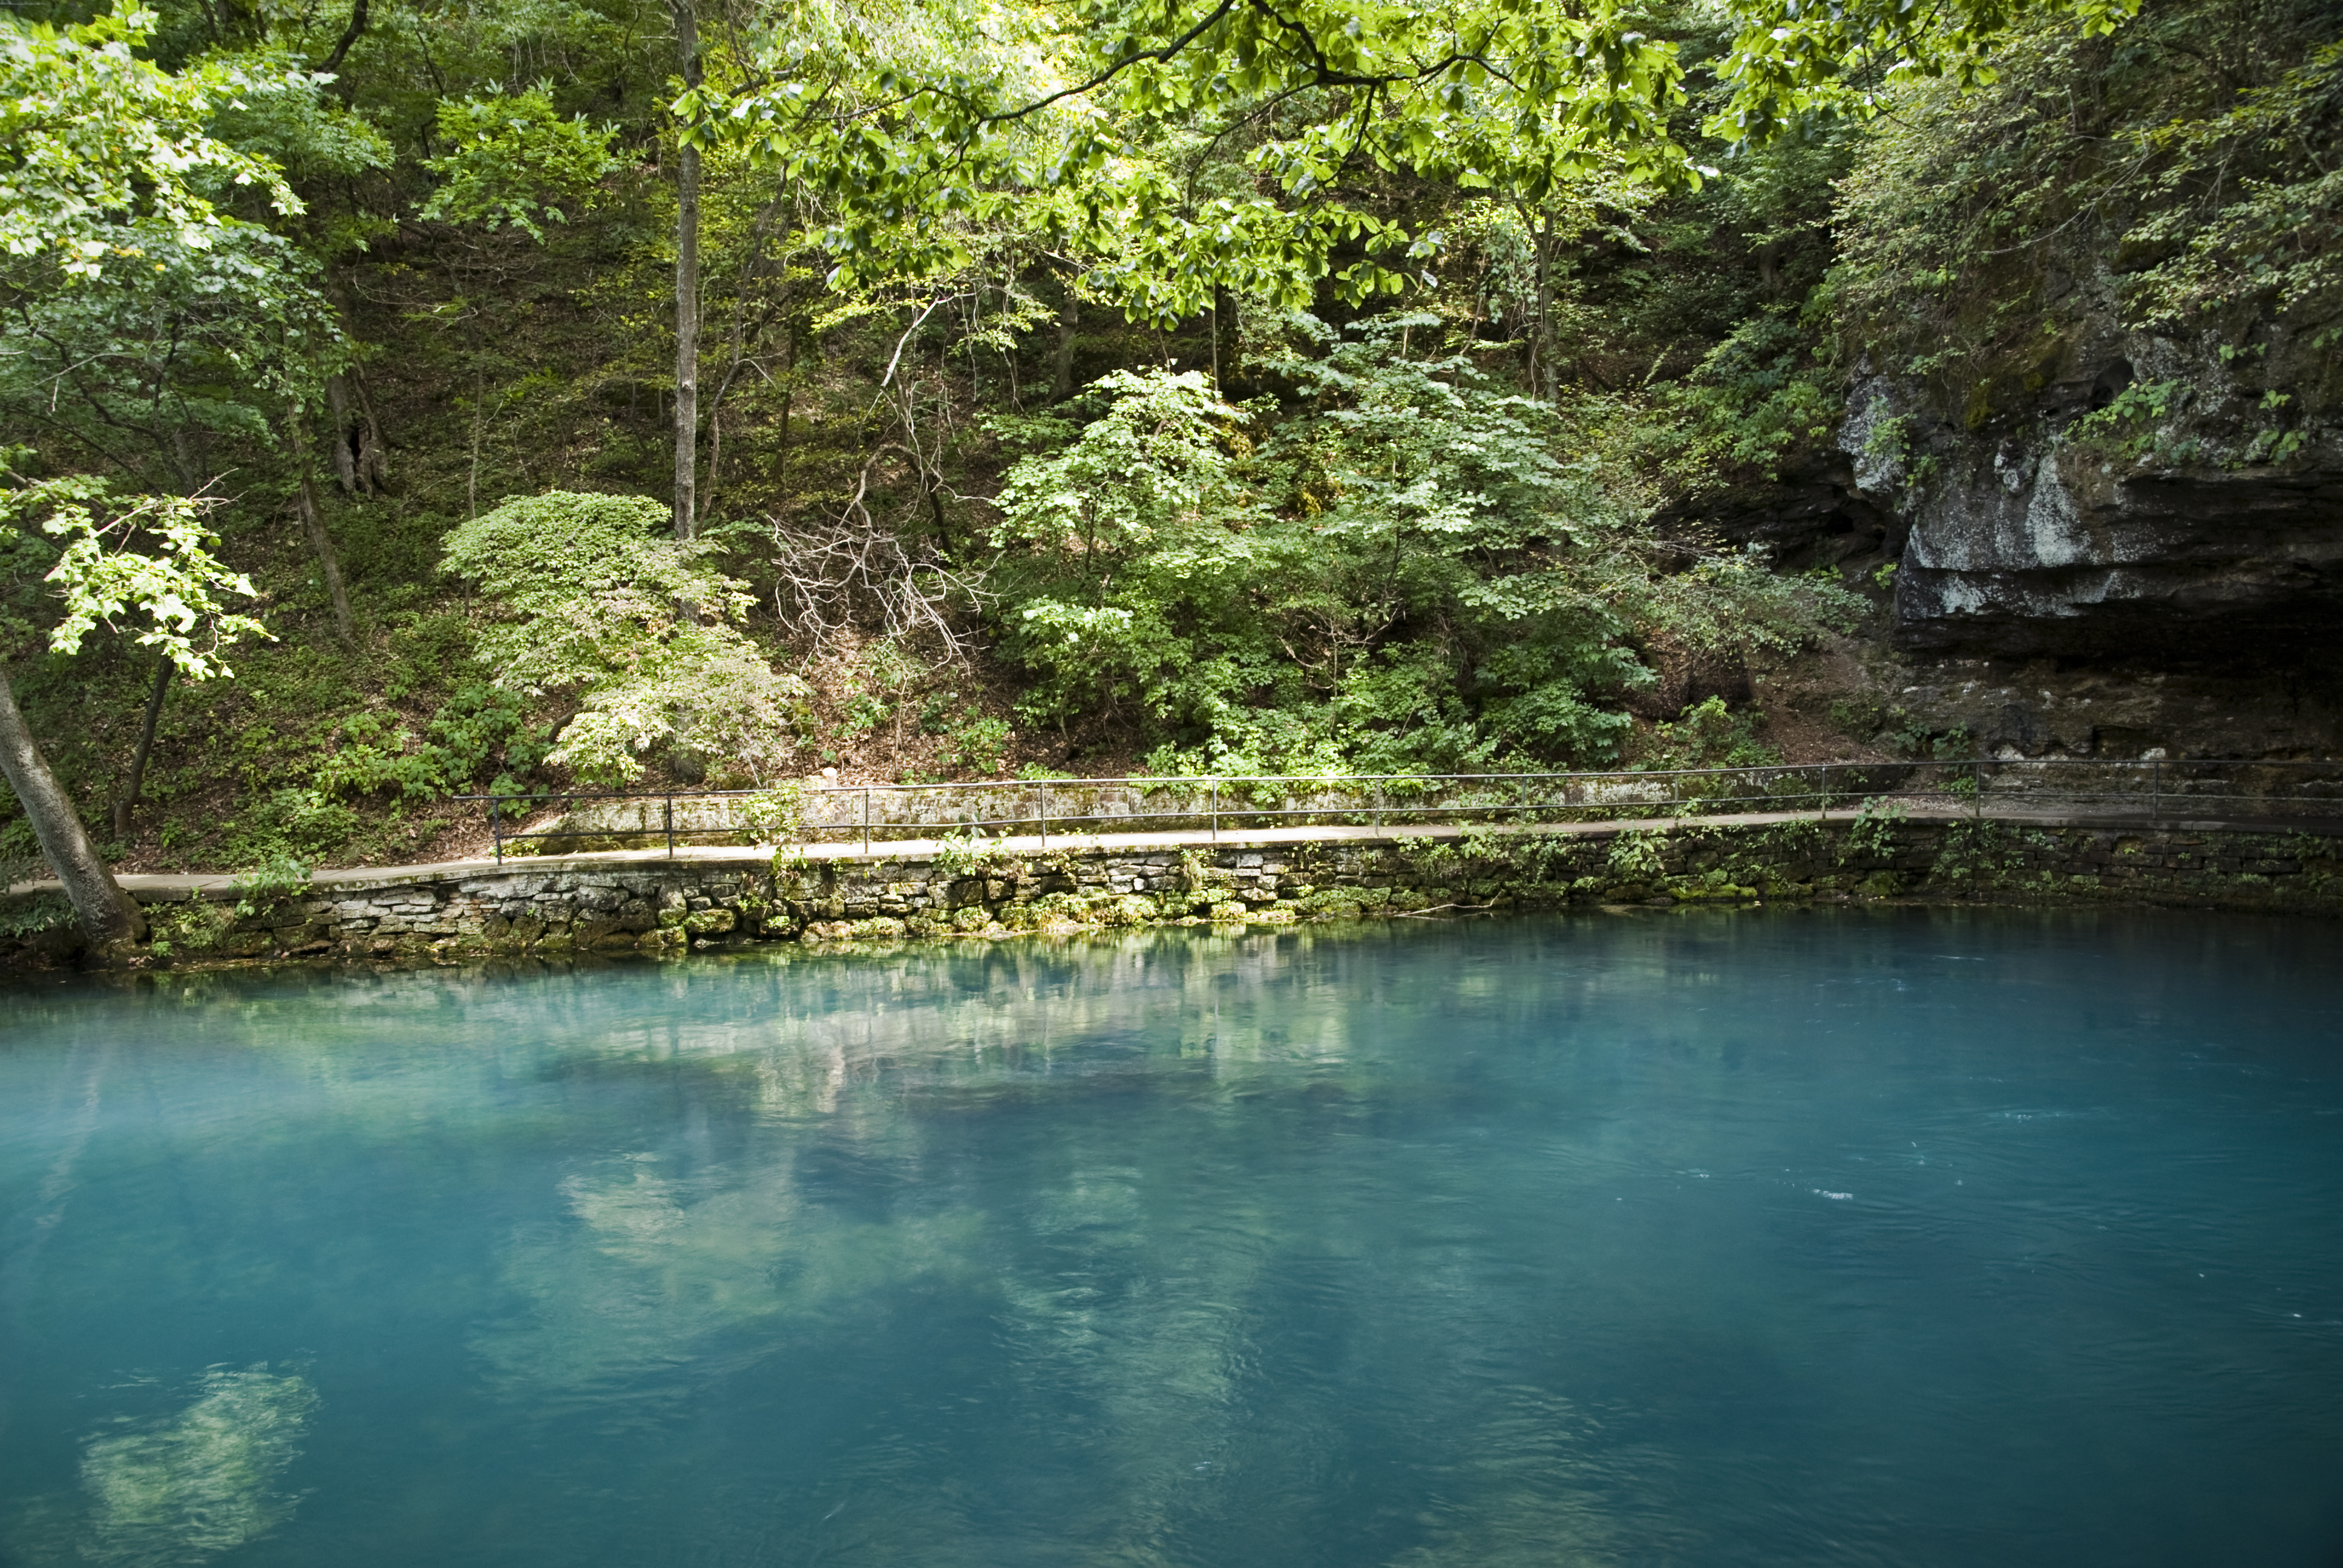 A still pool of turquoise water and overhanging, verdant branches create a placid and inviting riverside scene.